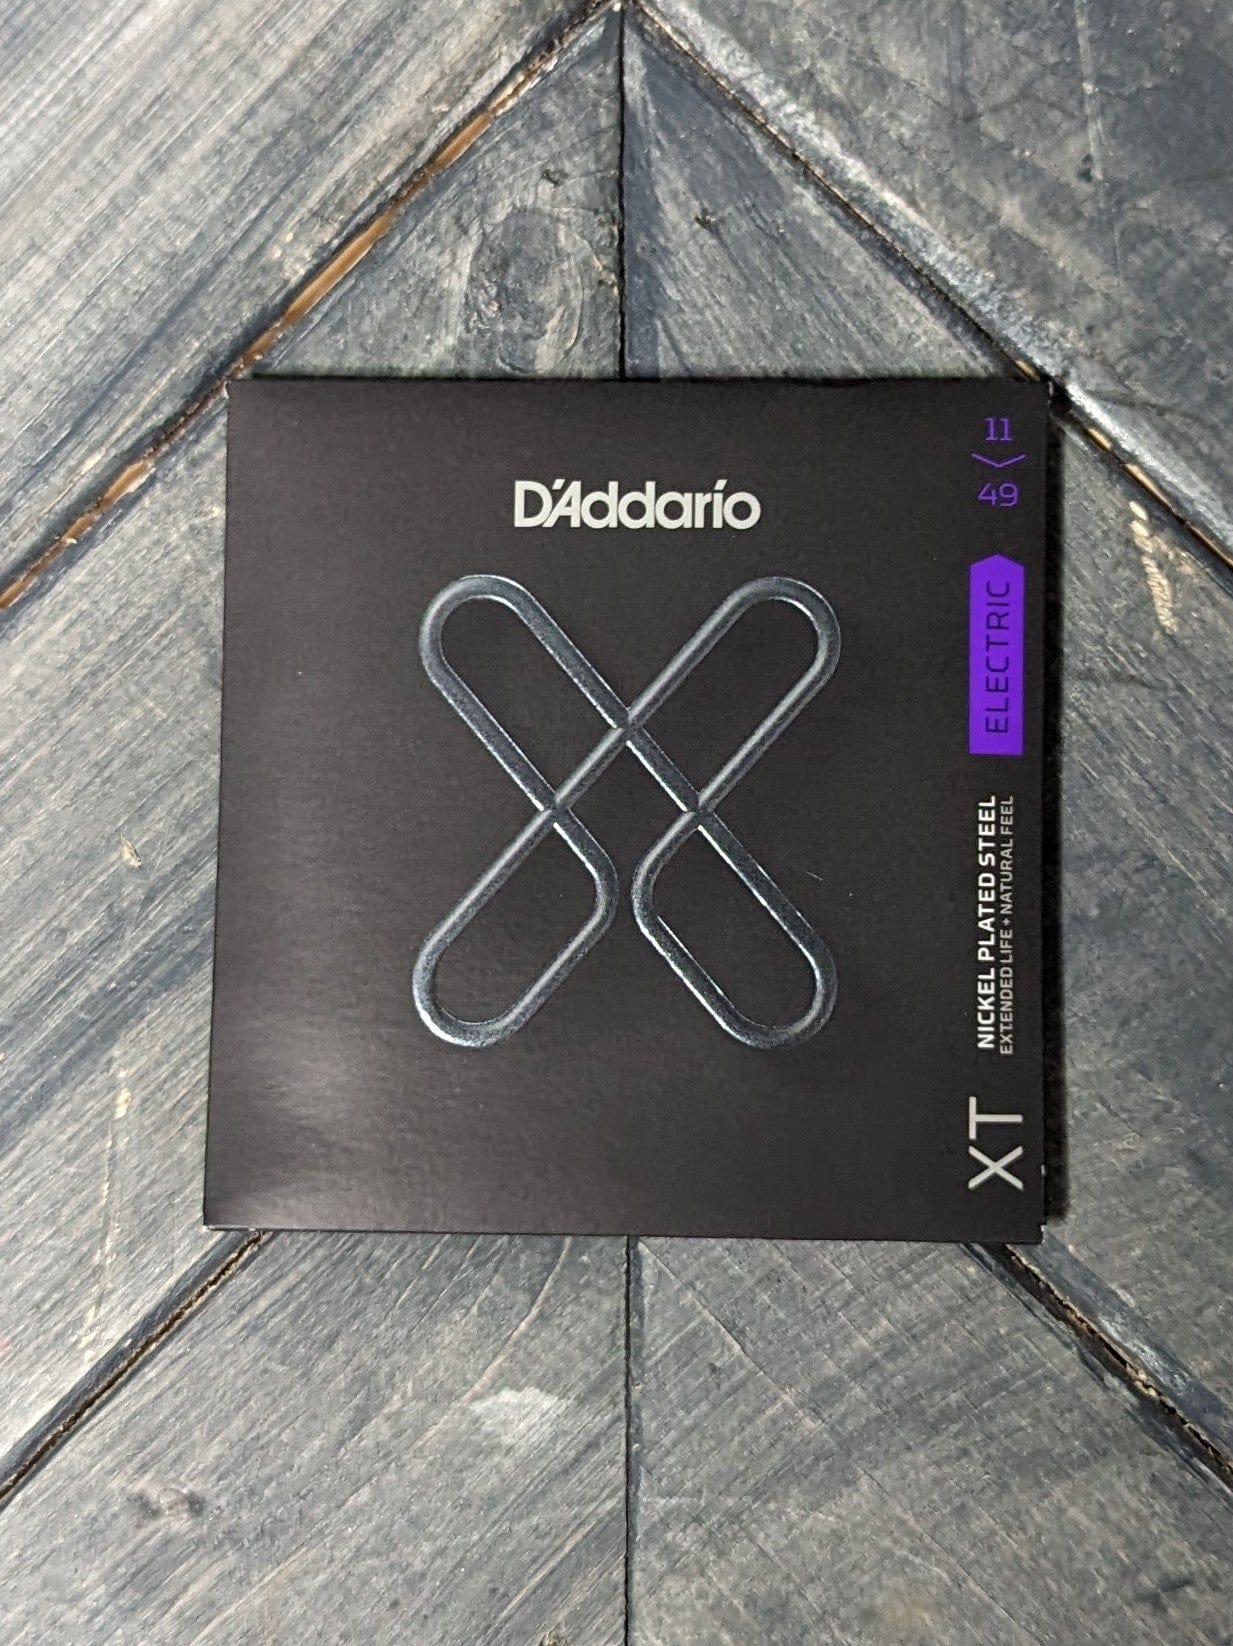 D'Addario XTE1149 front of the packaging